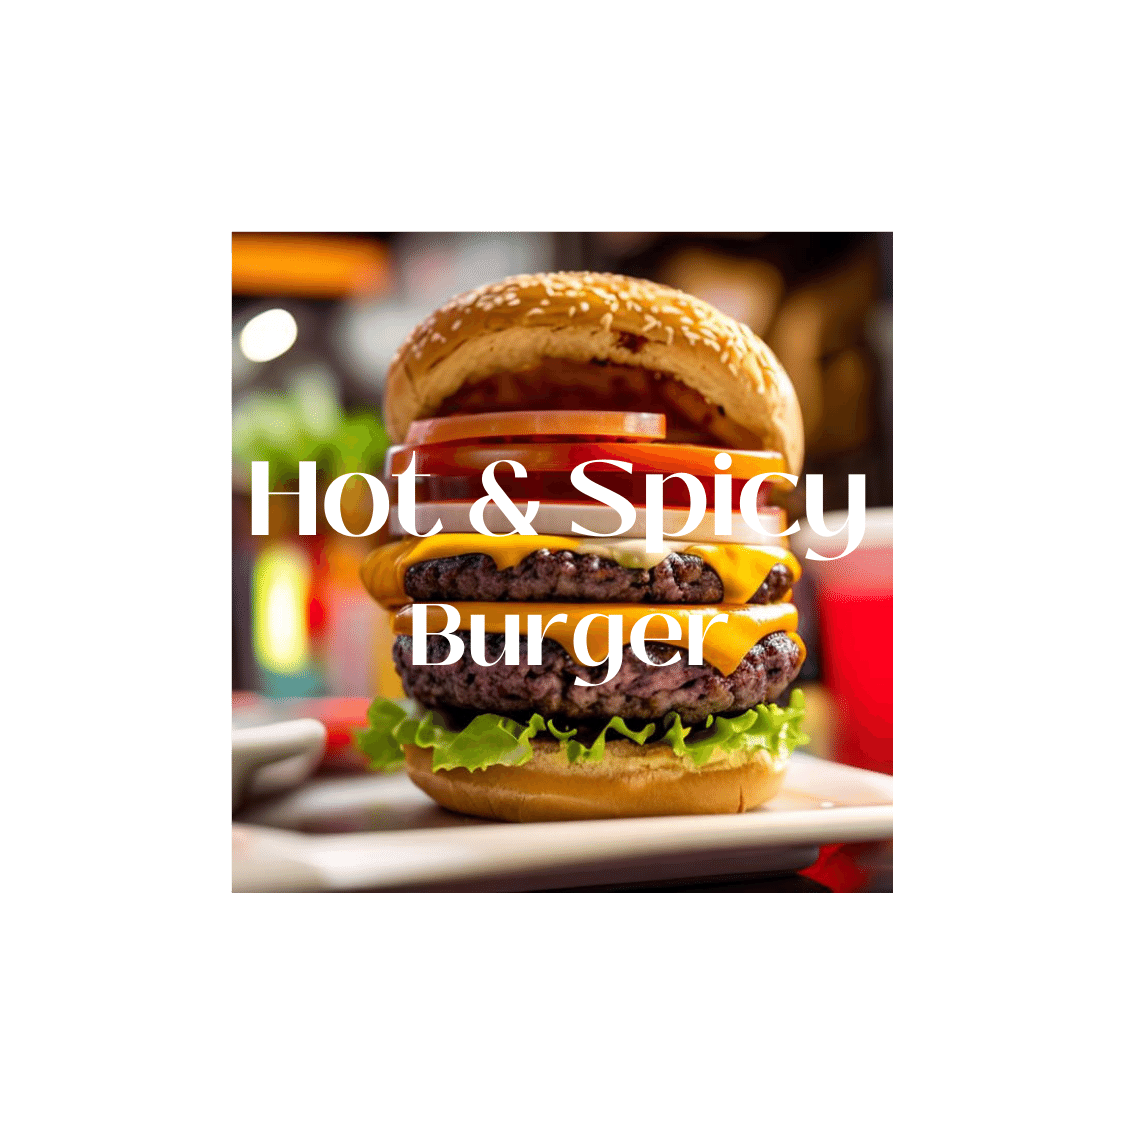 Hot & spicy Burger preview image.